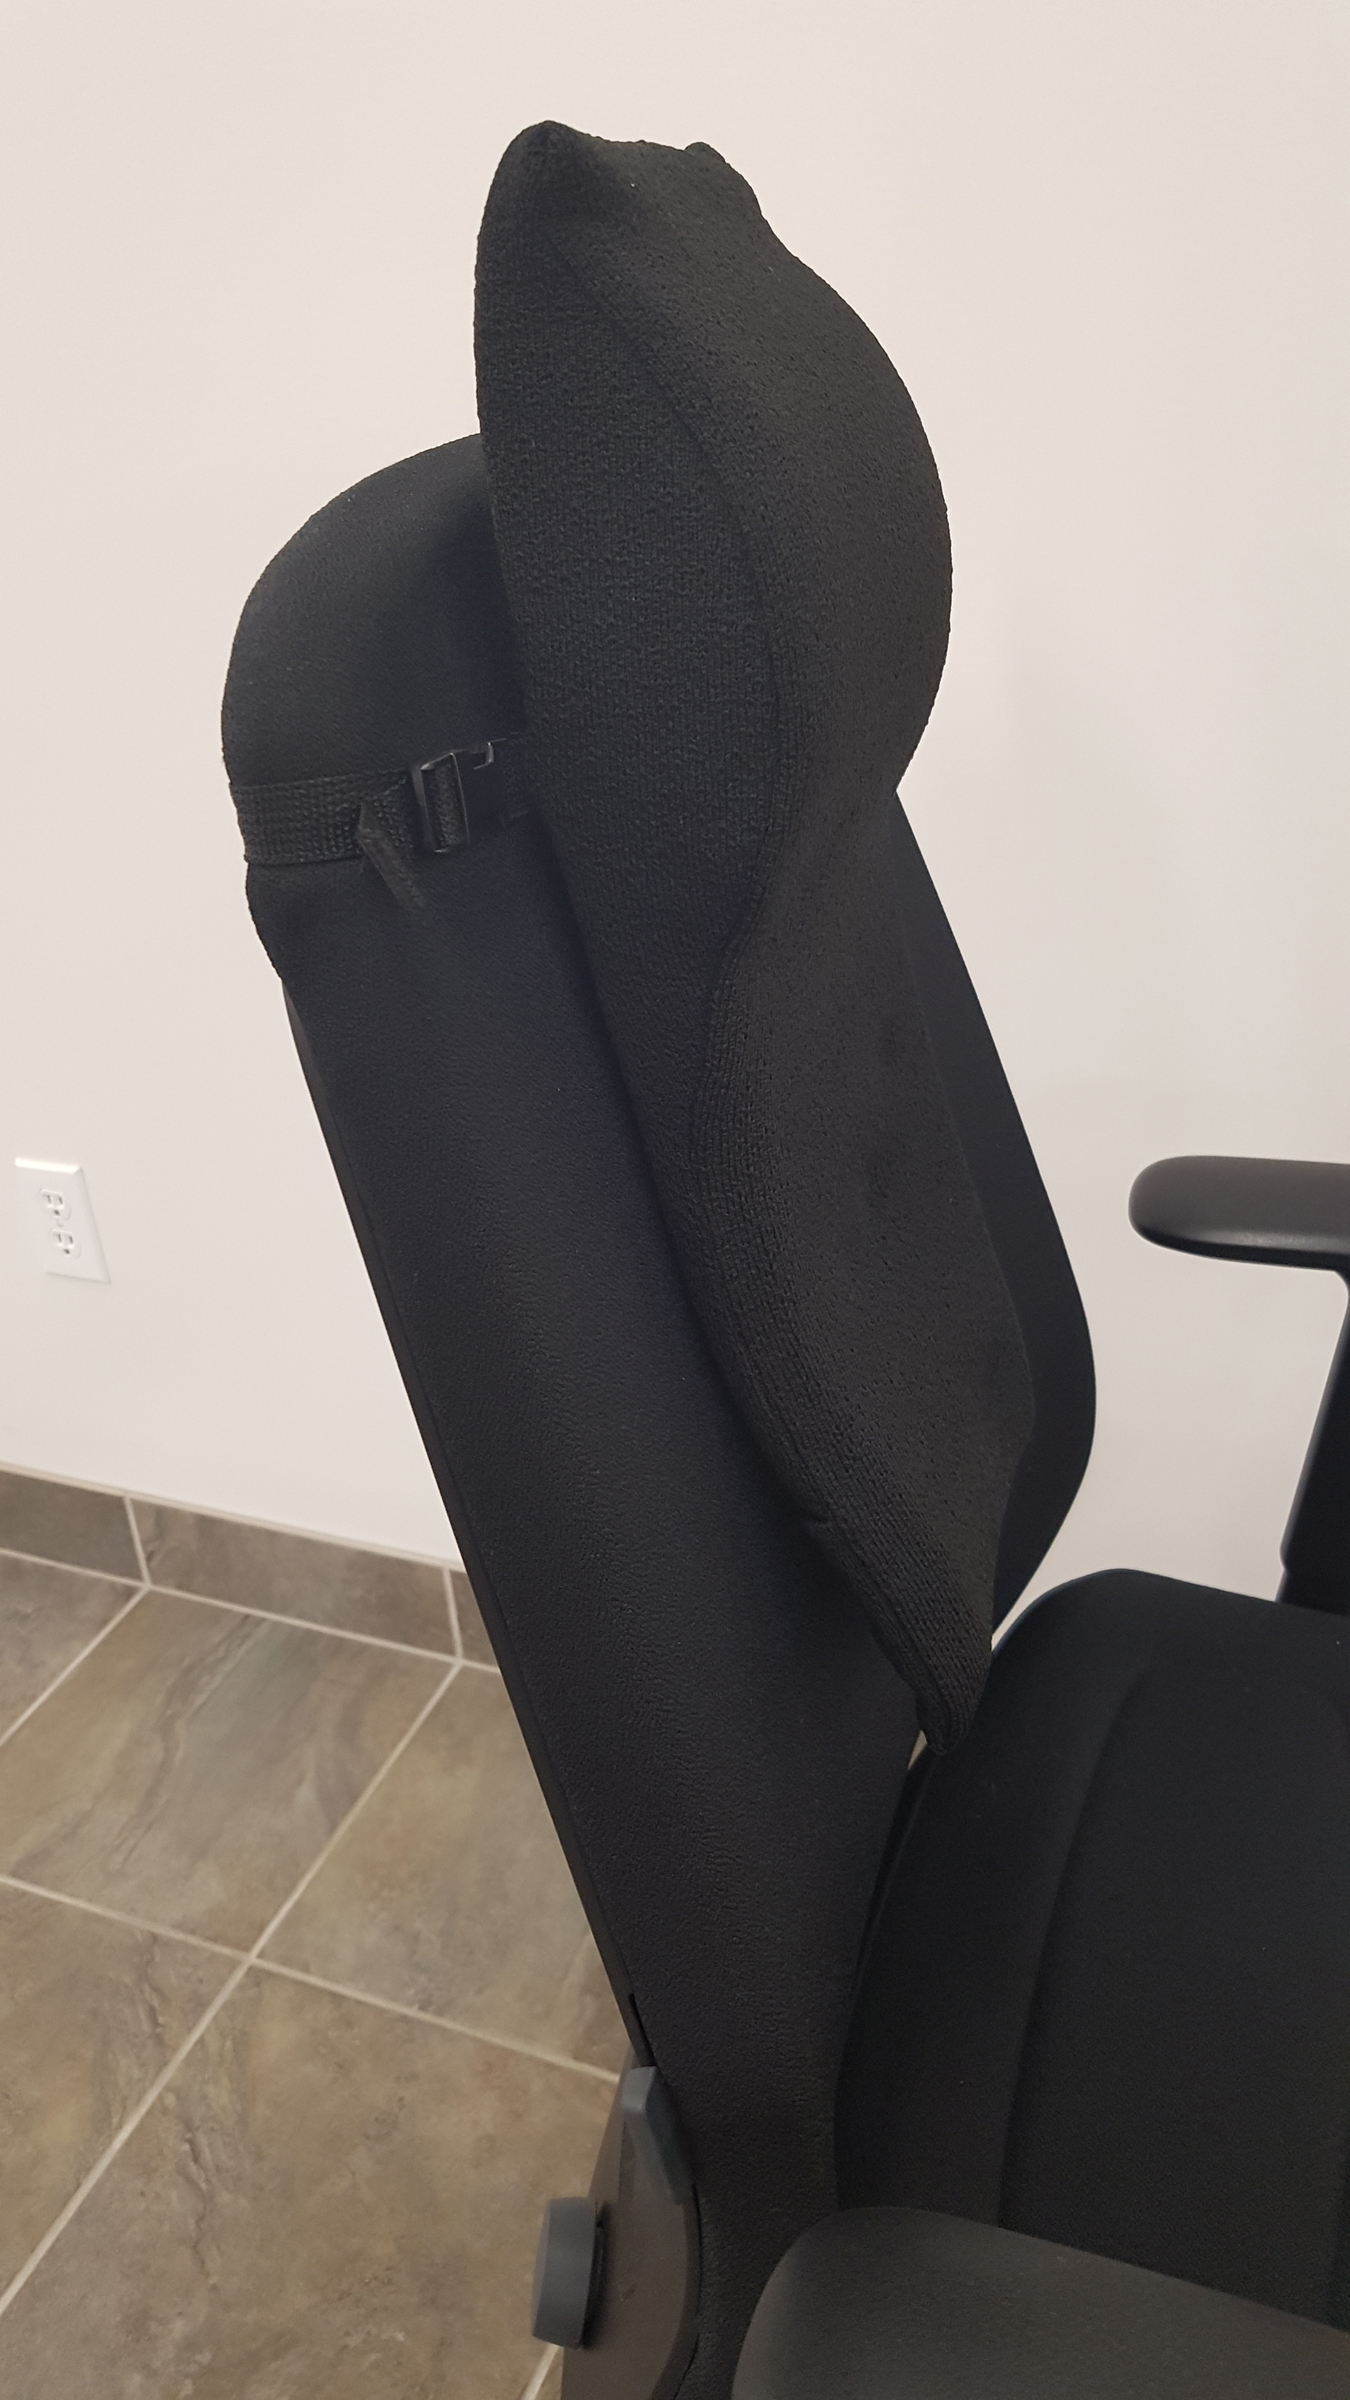 Neck Ease - Adds Neck Support